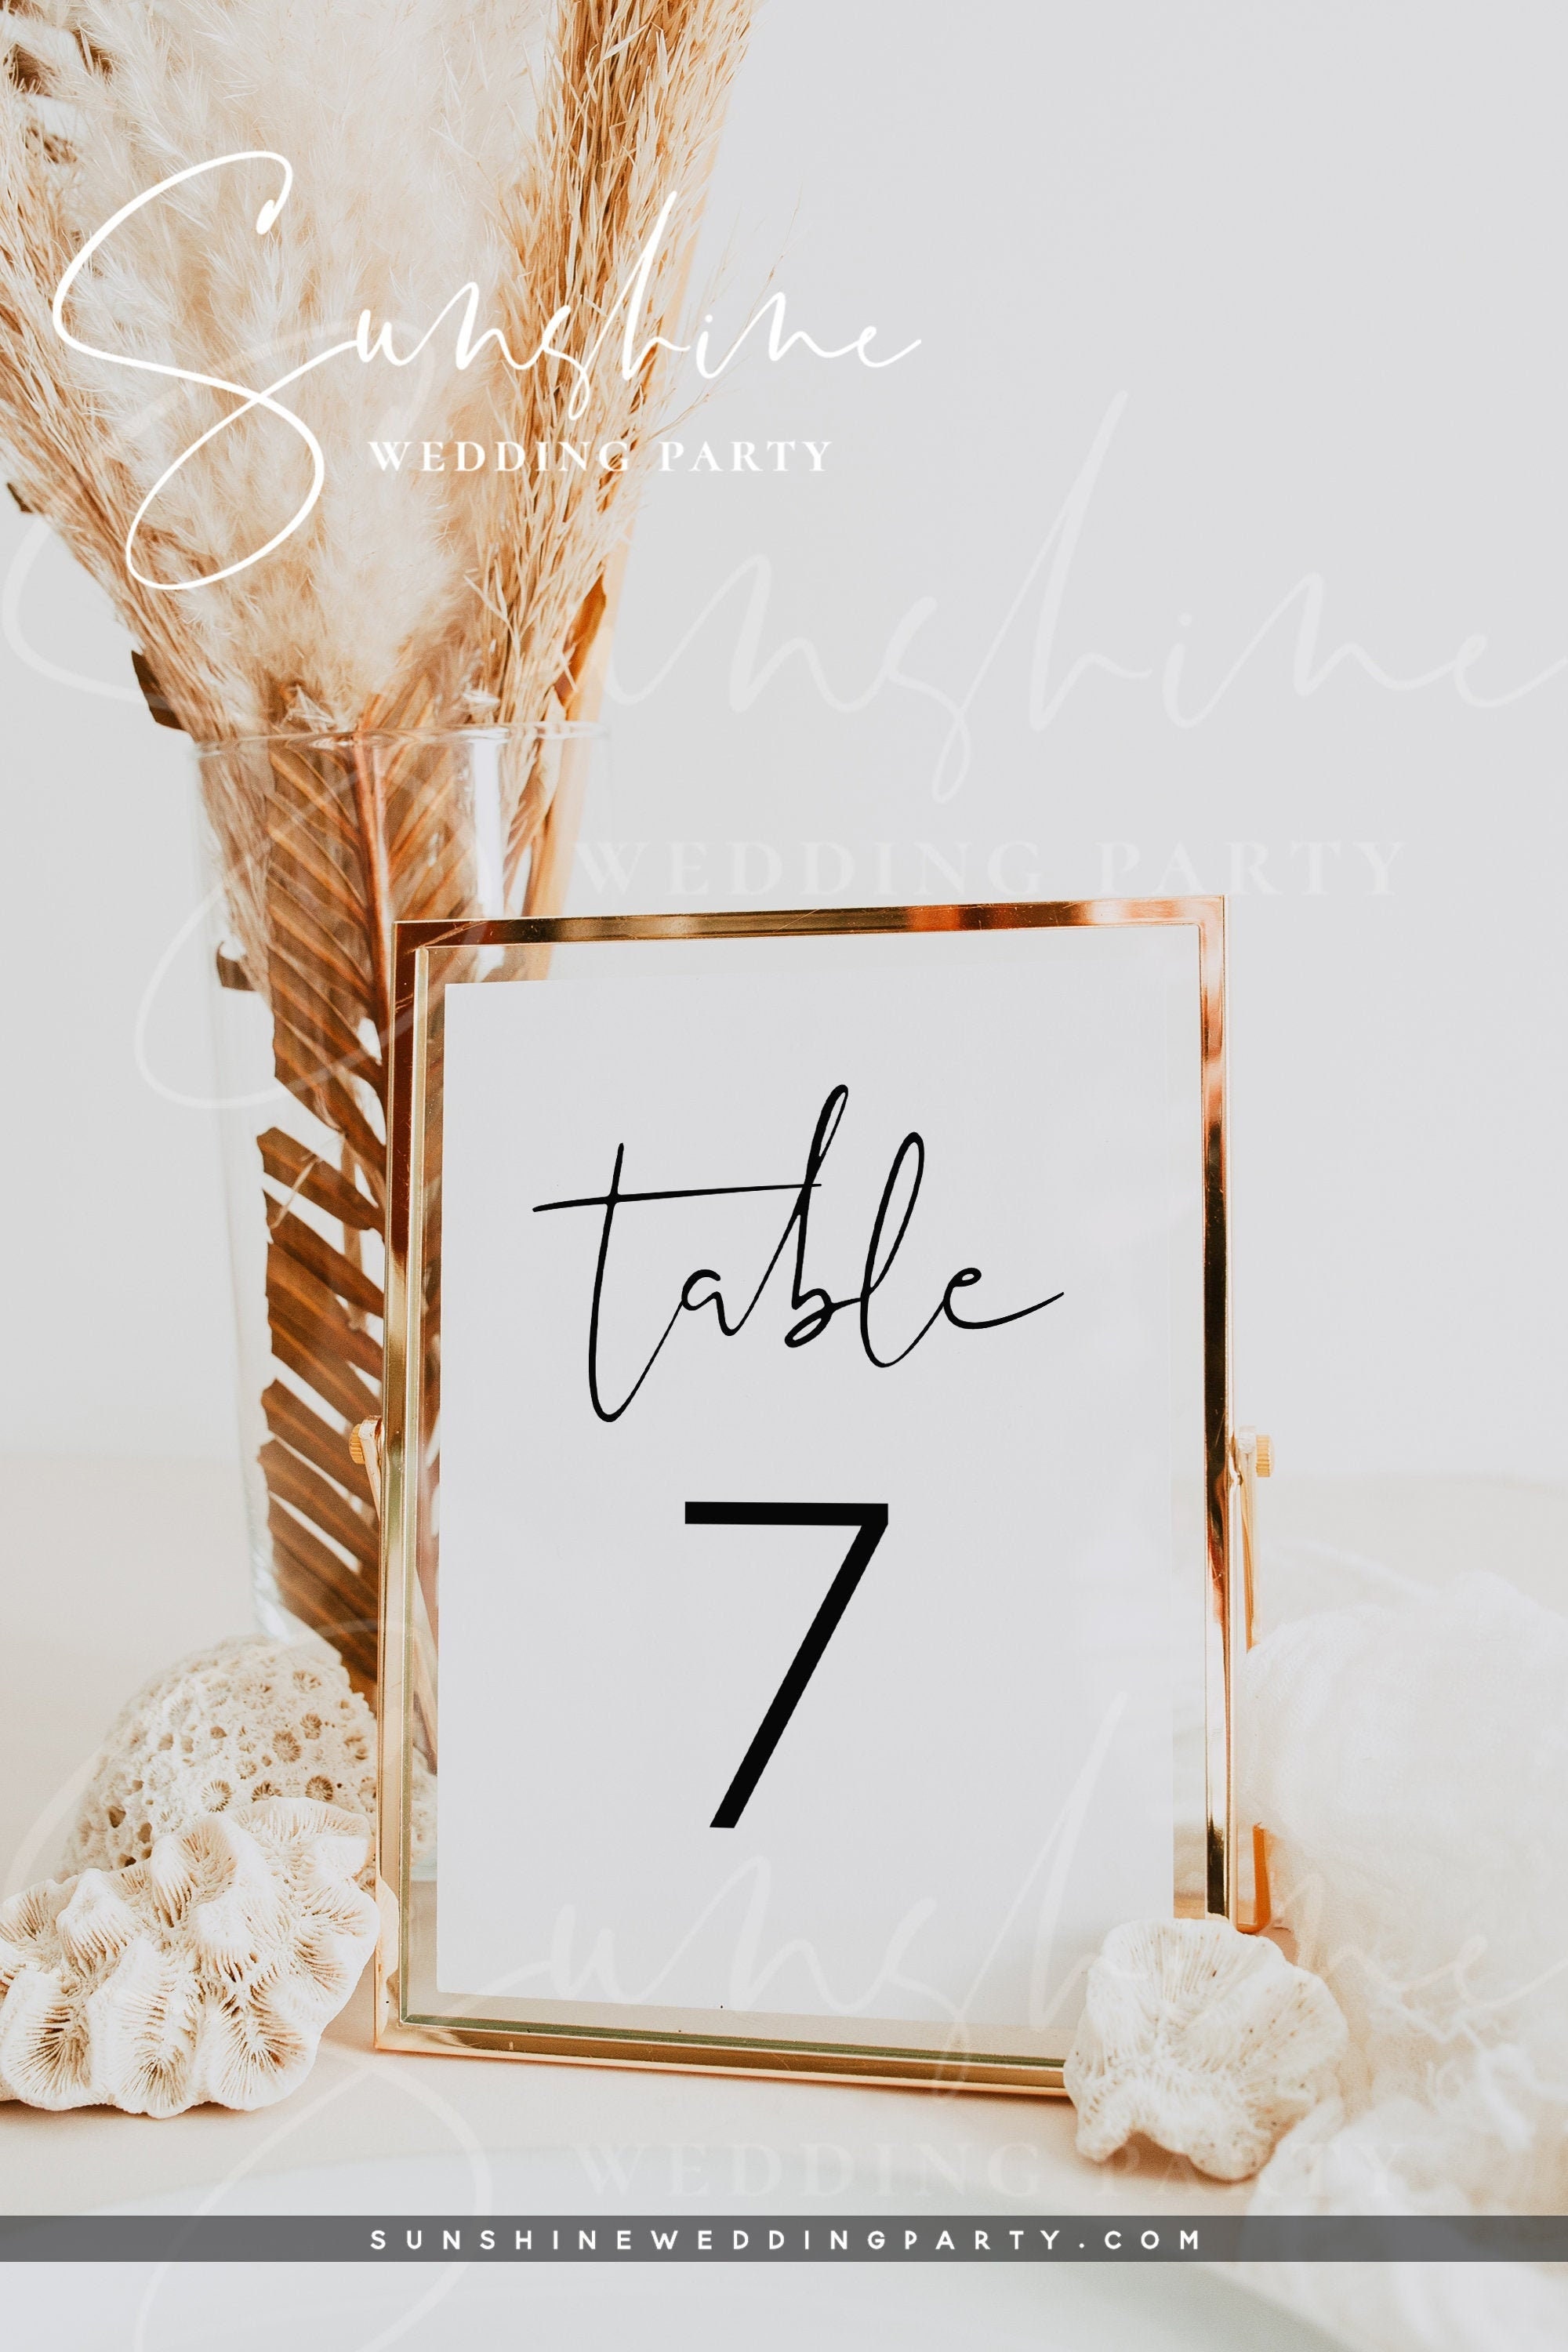 Table Numbers Modern Wedding INSTANT DOWNLOAD Wedding Table Numbers Modern The Devon Wedding Collection Edit Now